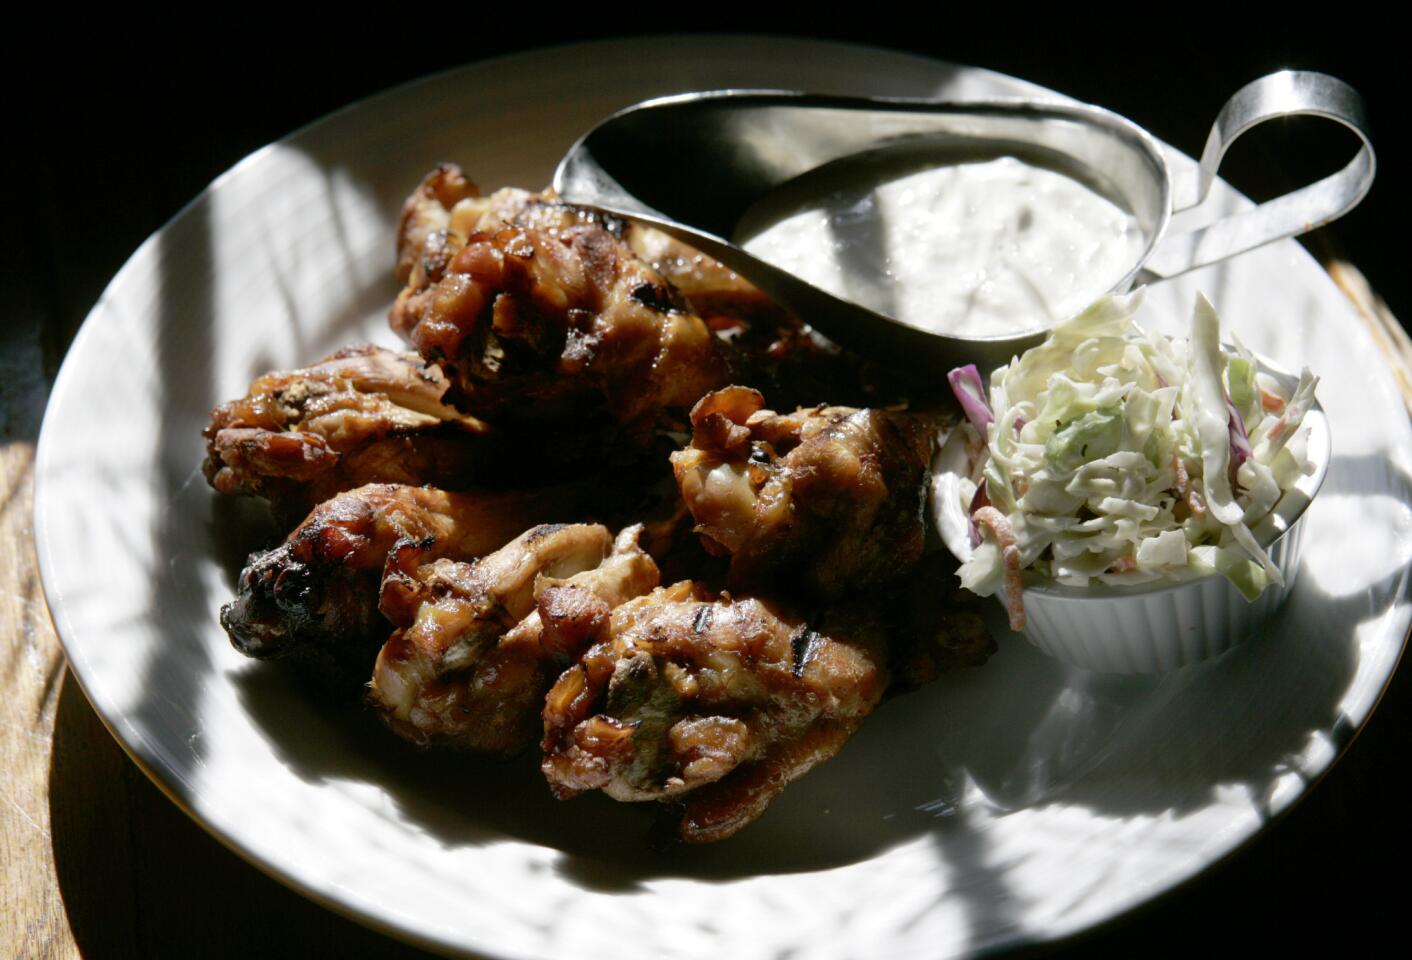 Muldoon's whiskey-marinated wings